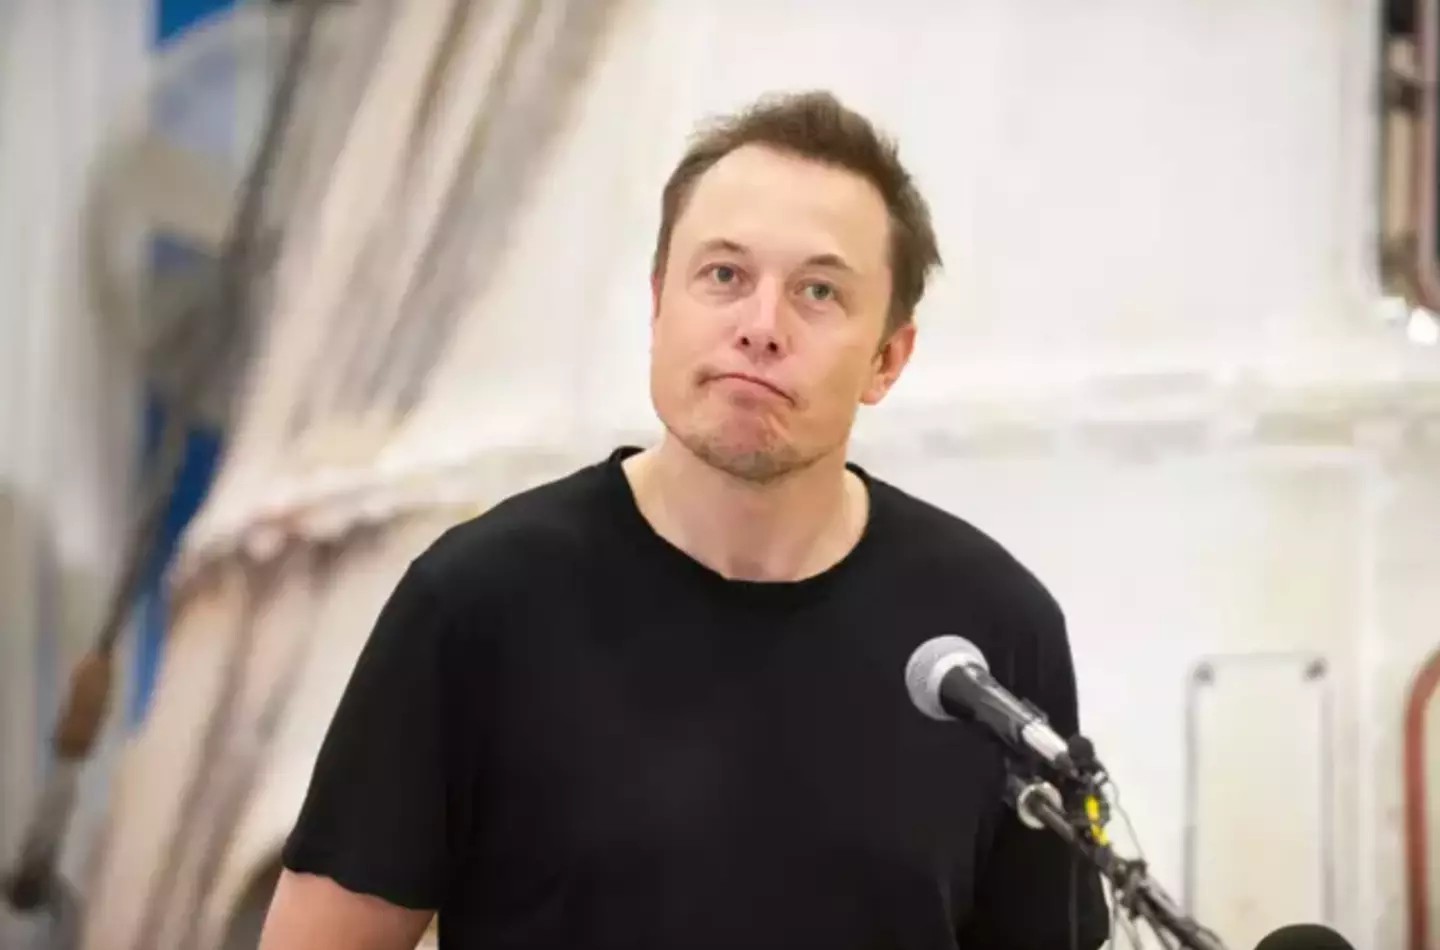 The homes in Musk's town will be rented out at a discount.